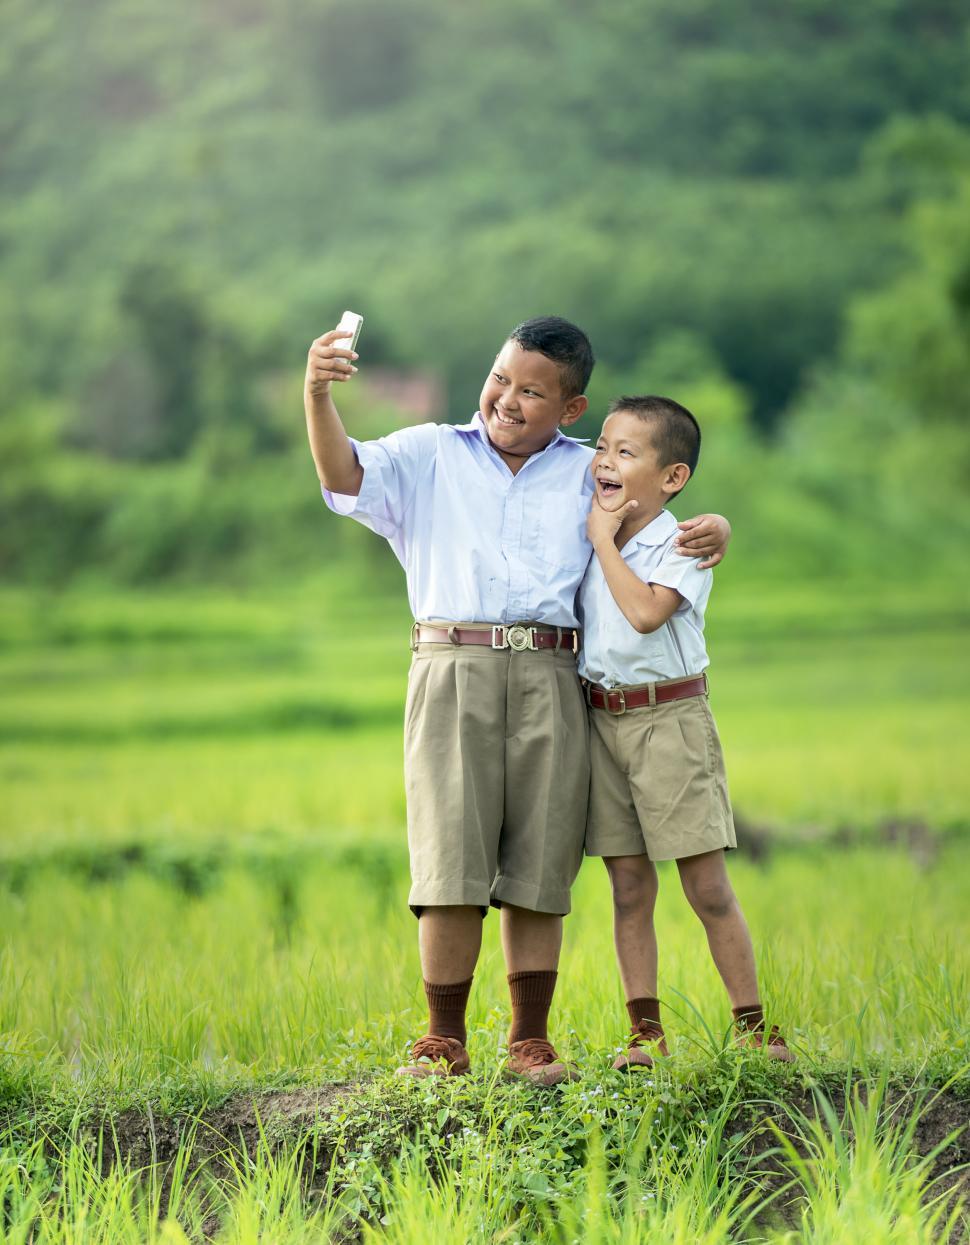 Free Image of Man and Boy Standing in Field 